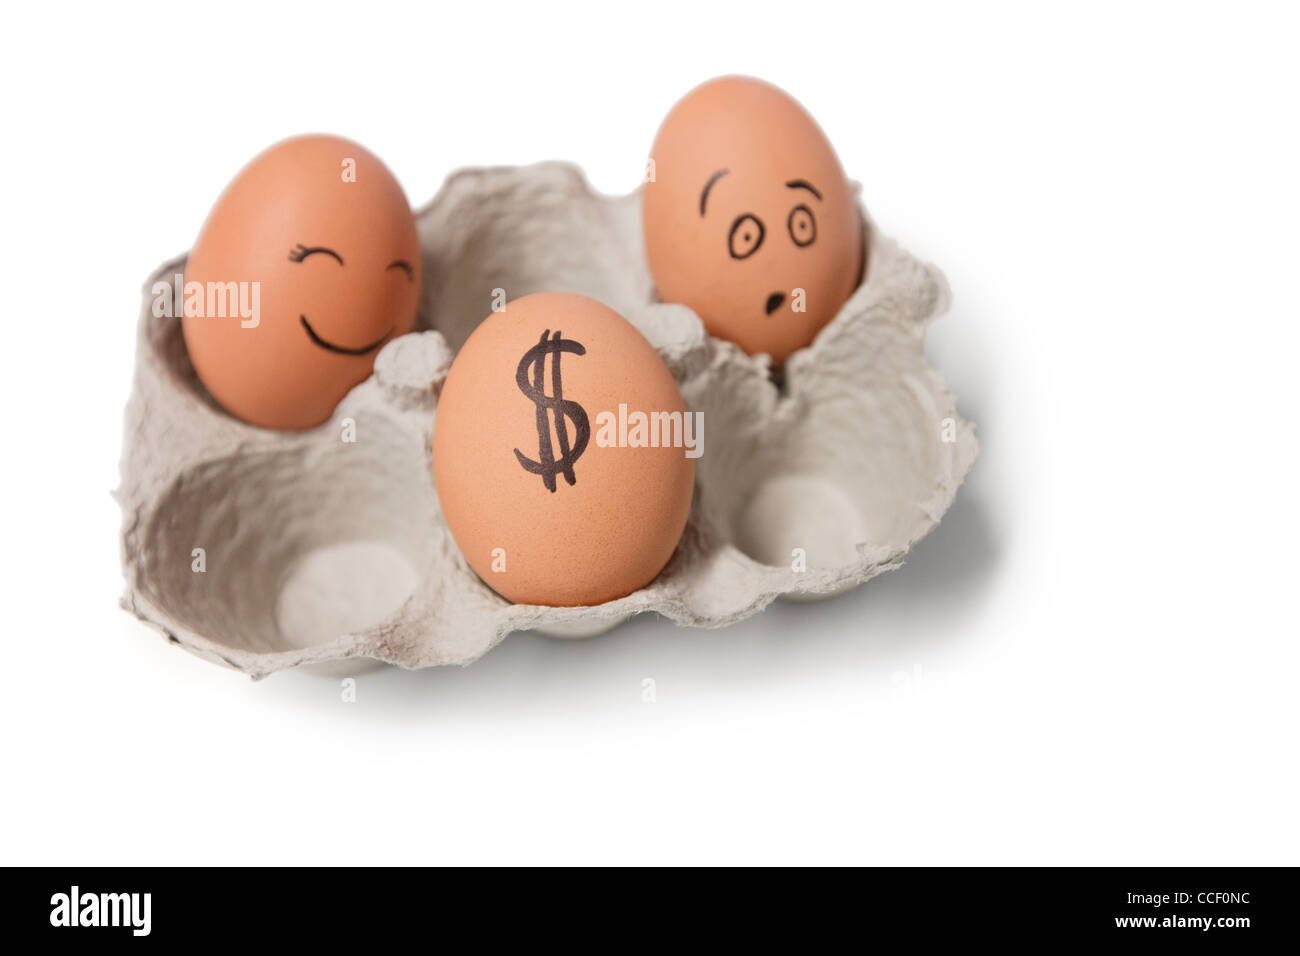 Three eggs in carton with a dollar sign on one egg Stock Photo